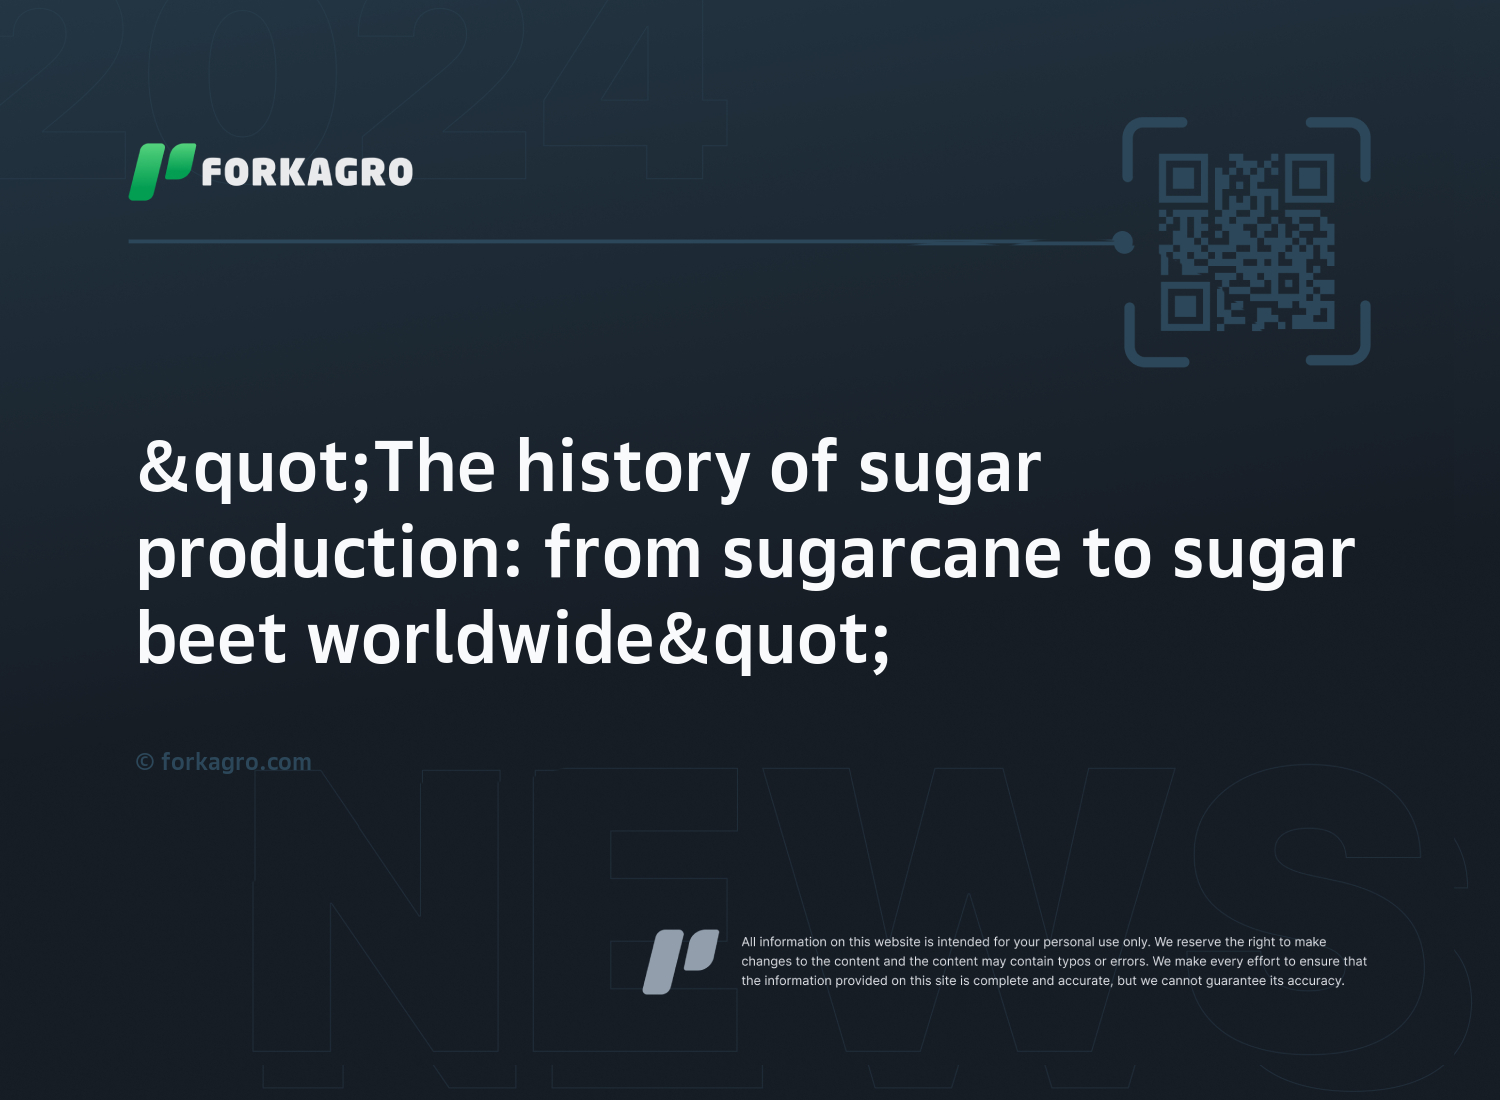 "The history of sugar production: from sugarcane to sugar beet worldwide"